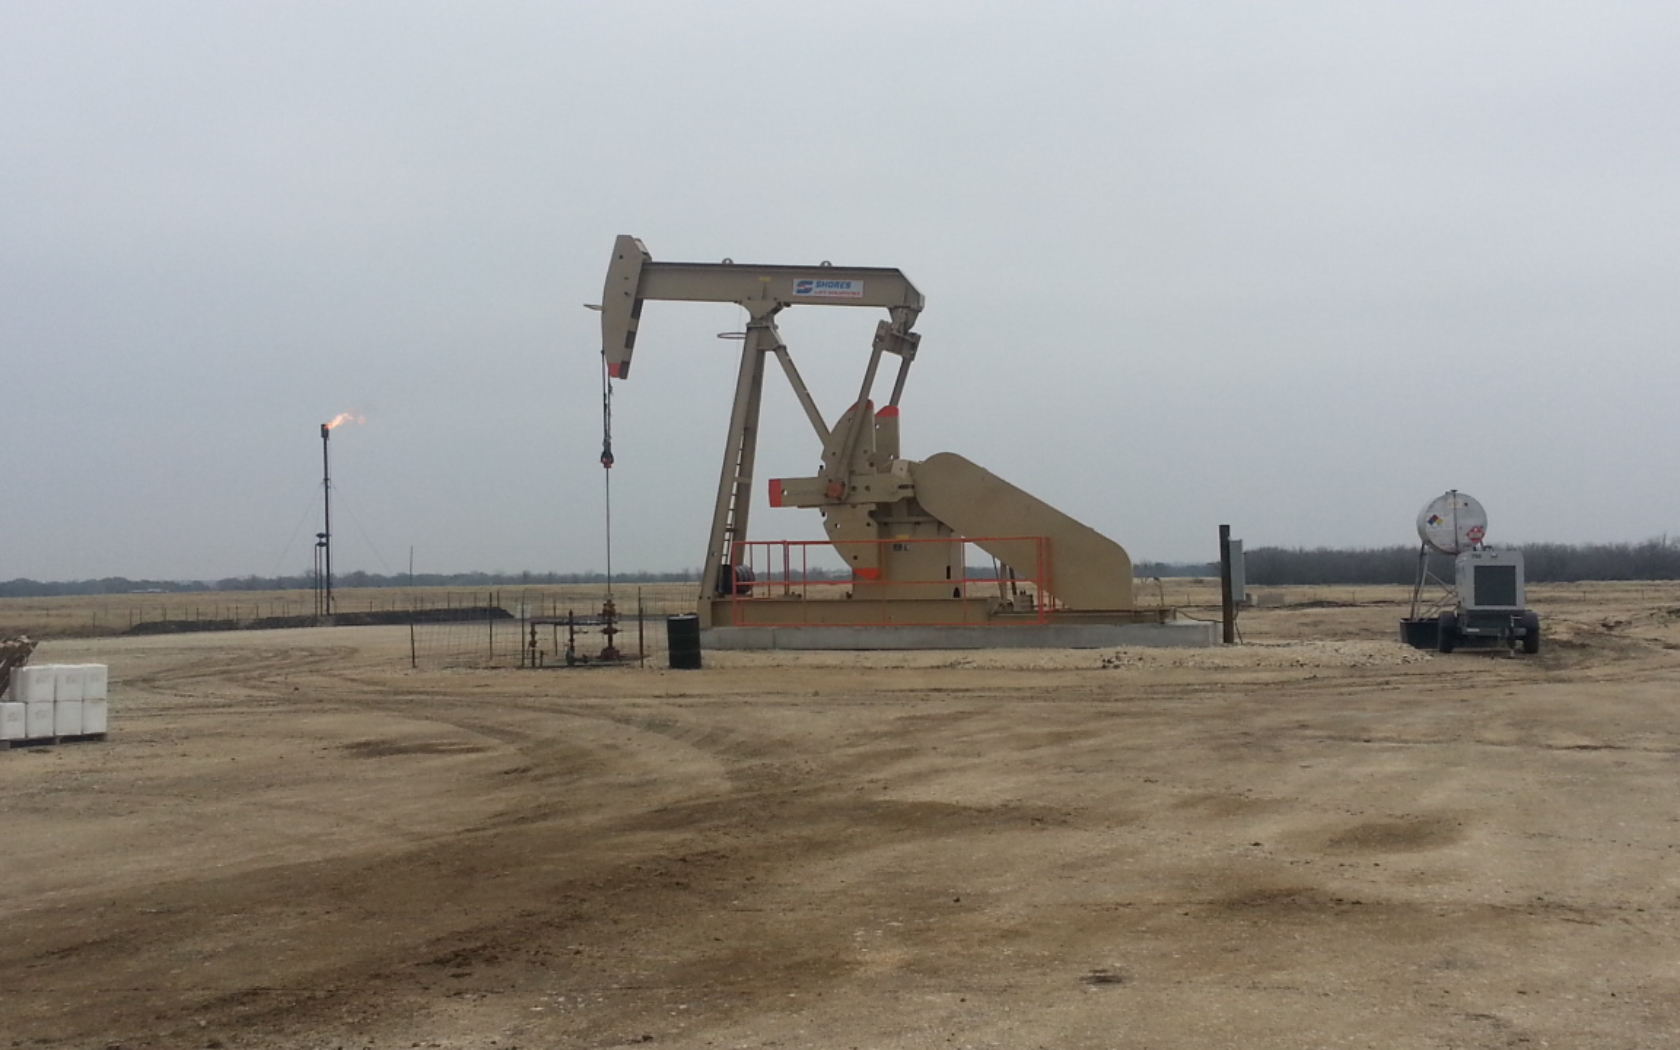 Everest Resource Company Wilson County Pump Jack with Flare